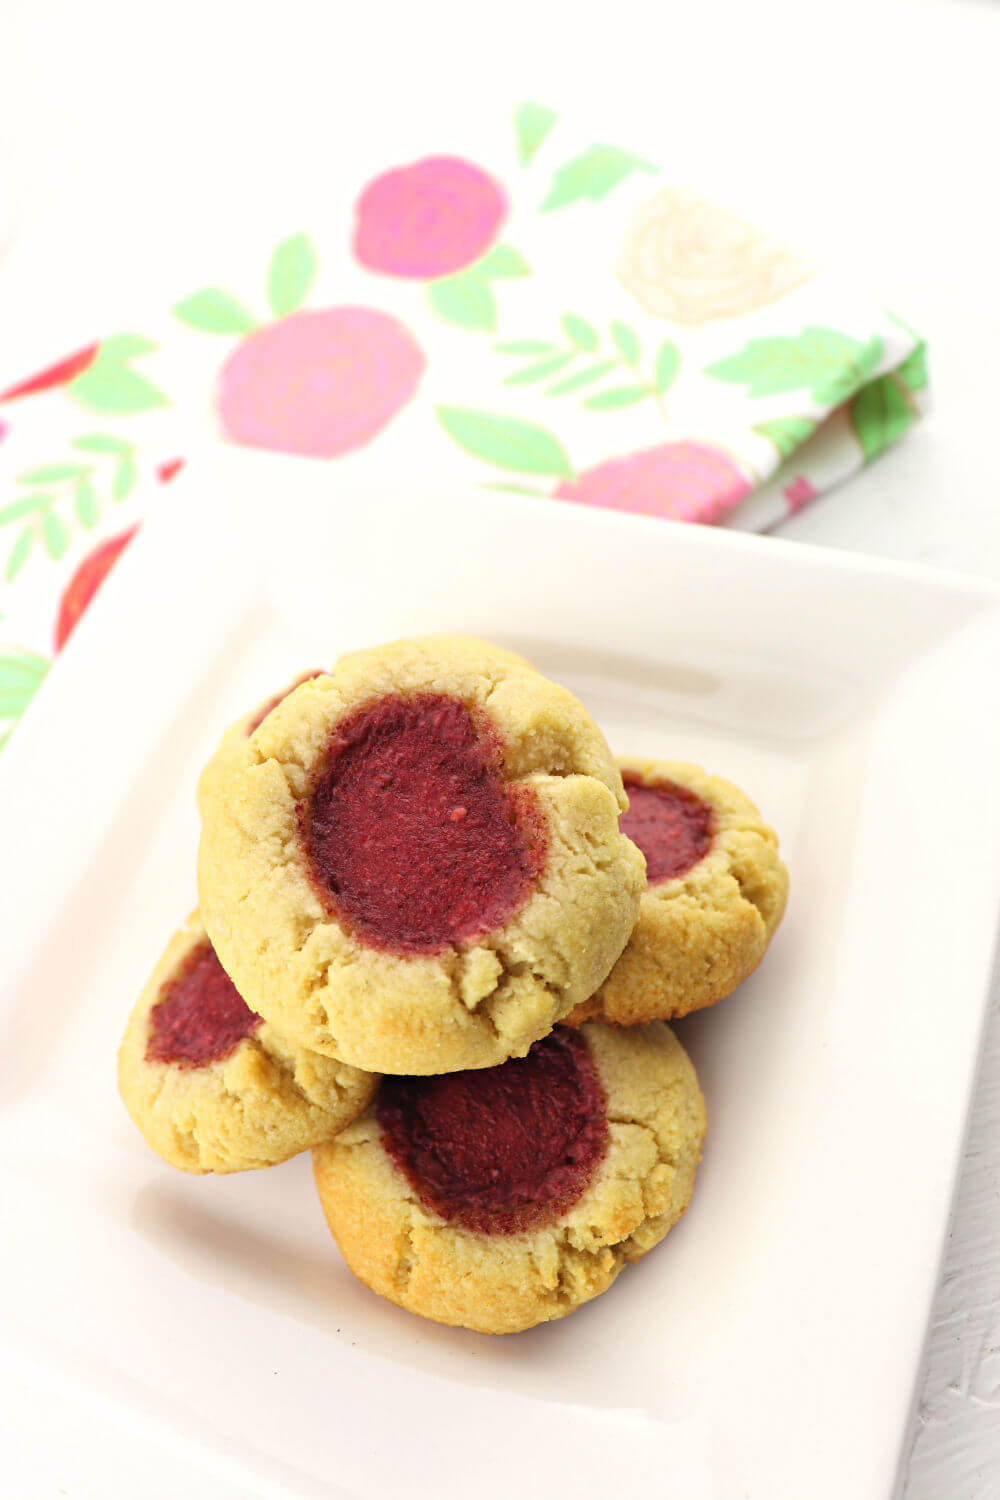 Butter and jam keto thumbprint cookies are delicious, kid-friendly, and low carb! Buttery melt in your mouth gluten-free, sugar-free goodness. #ketocookies #lowcarbdesserts